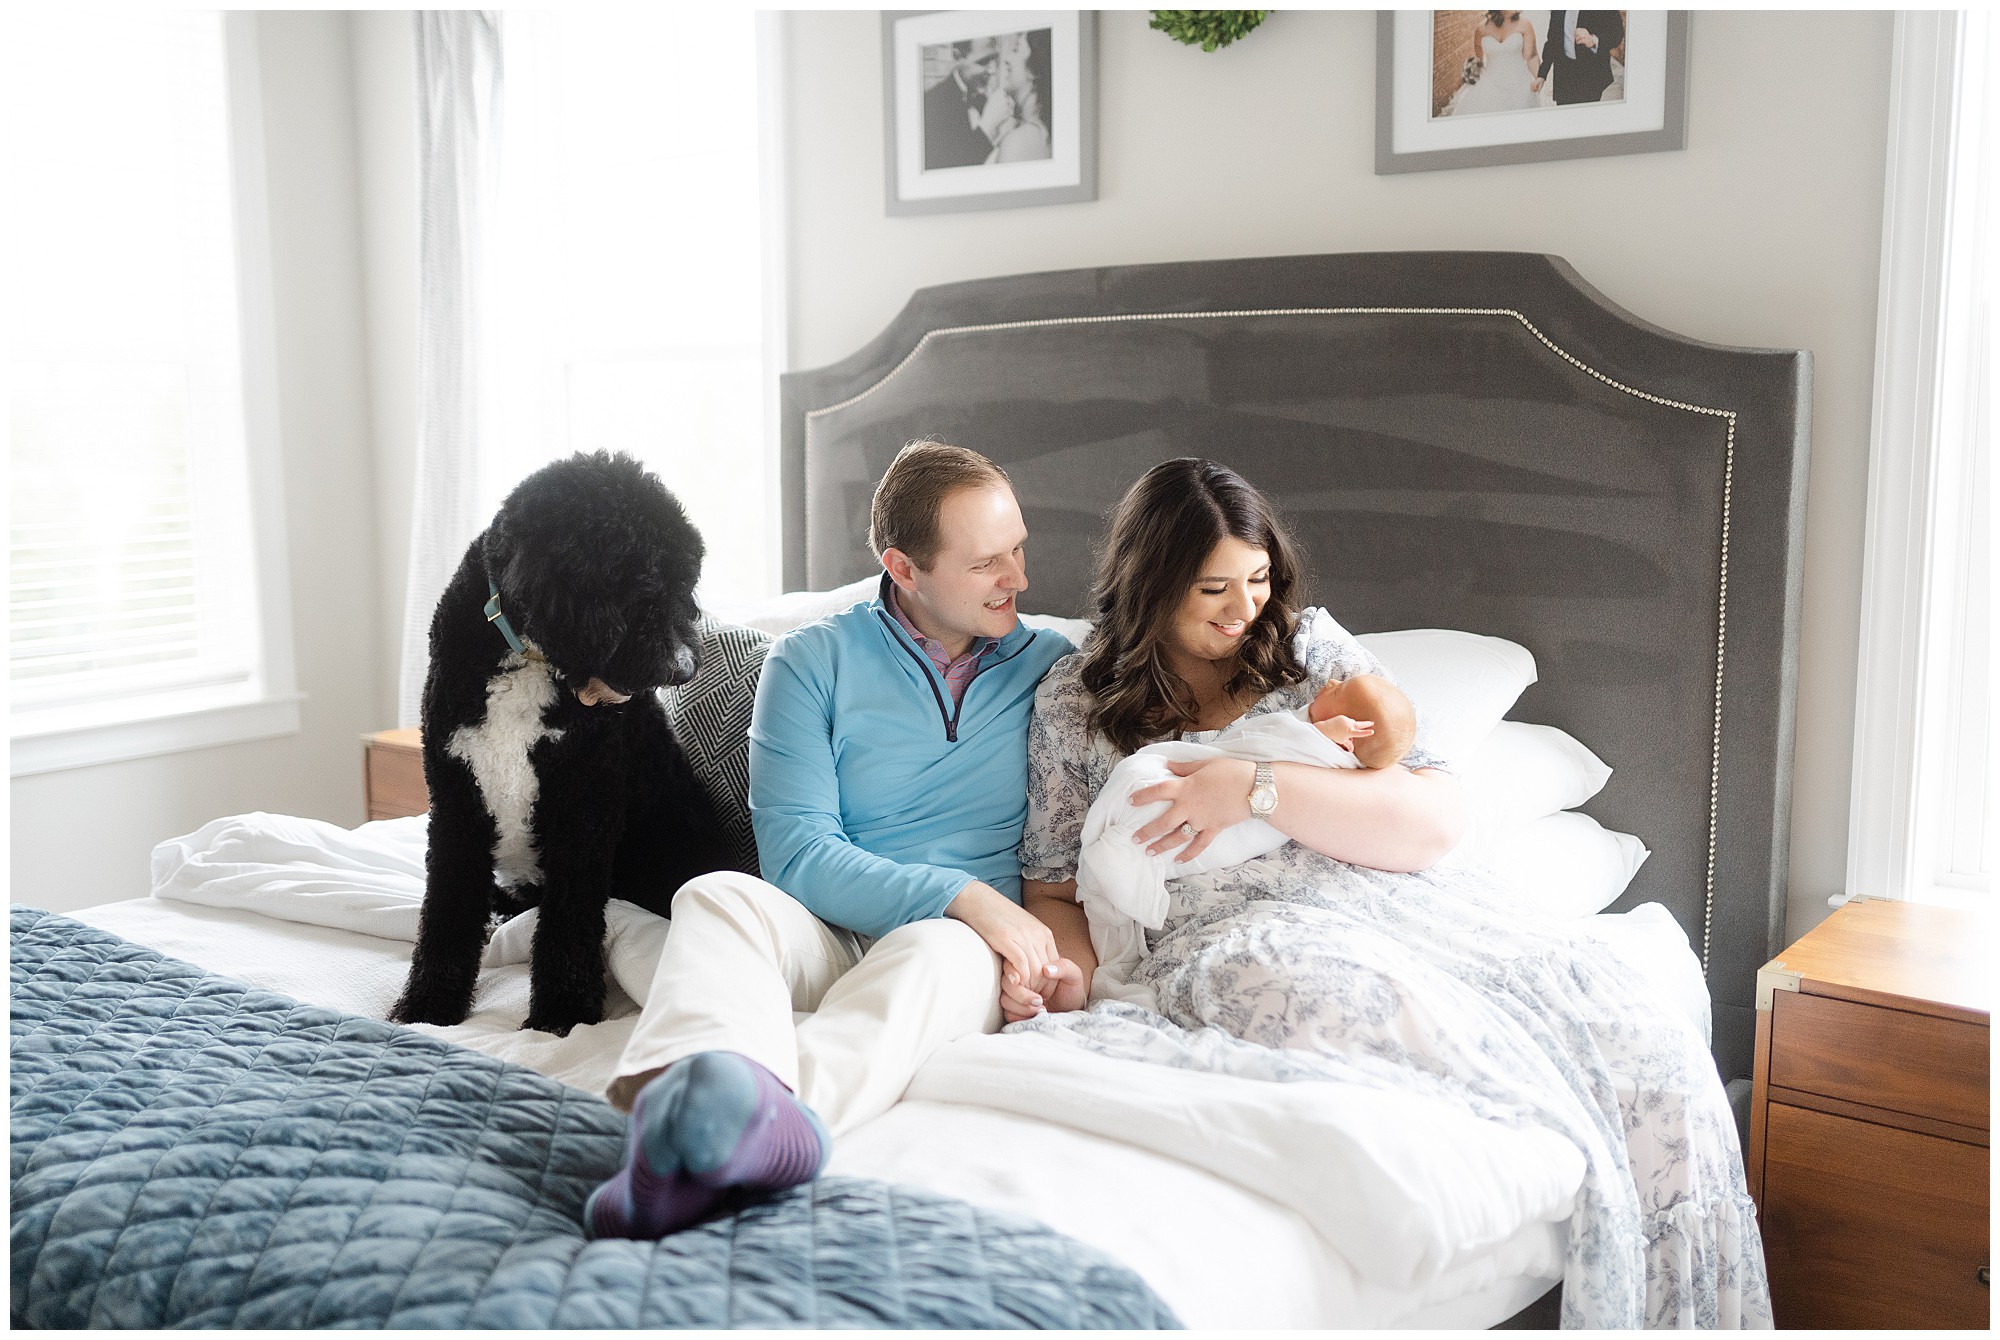 Parents sitting on their bed smiling down at their newborn baby with a black dog during their Atlanta in home newborn photography session.